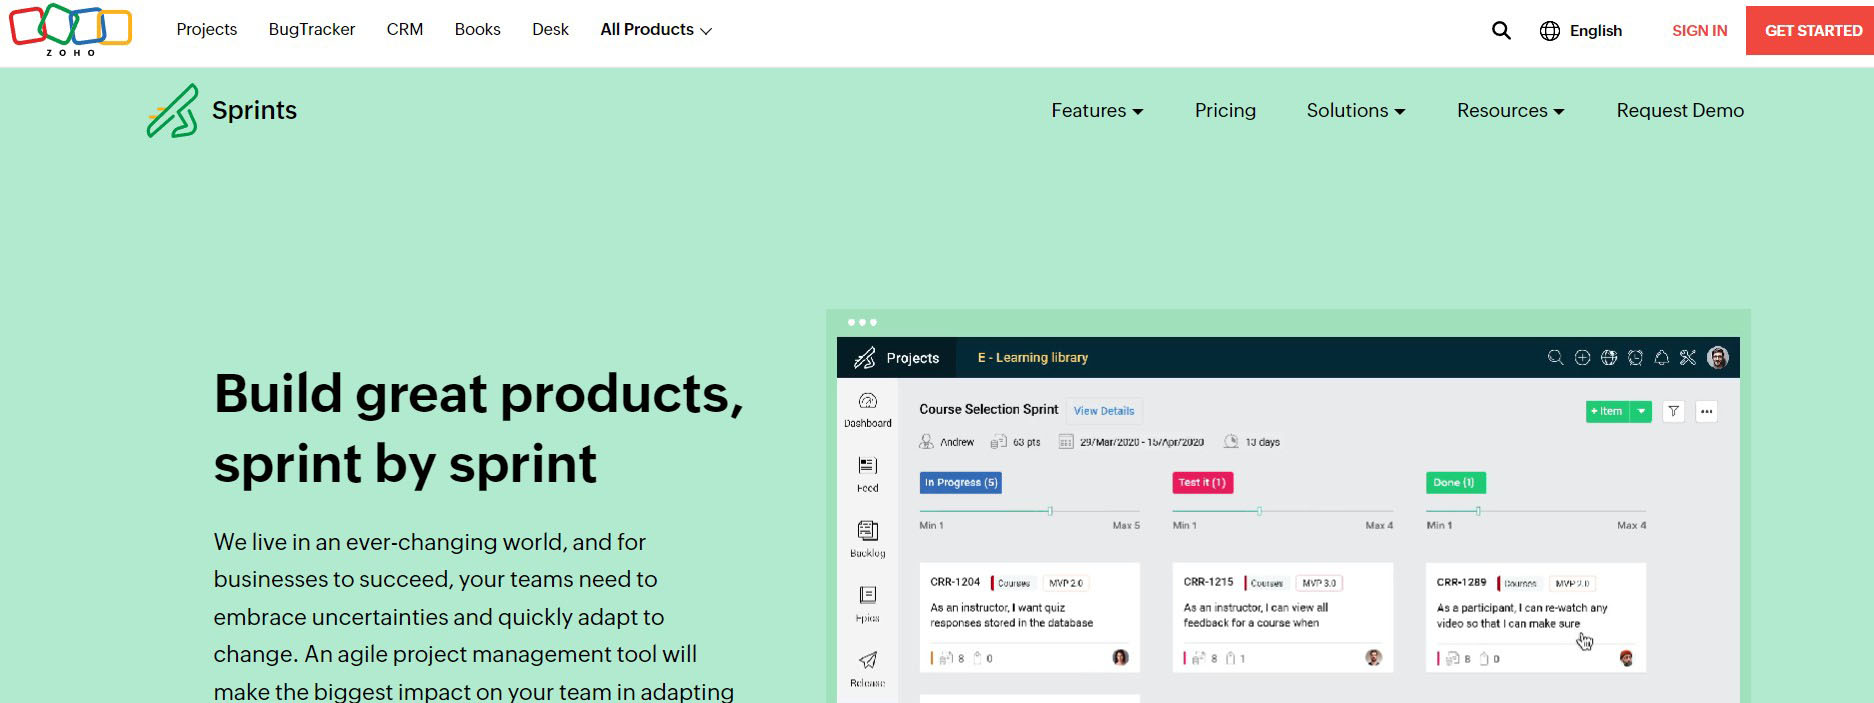 15 Best Product Management Tools for 2023 14 